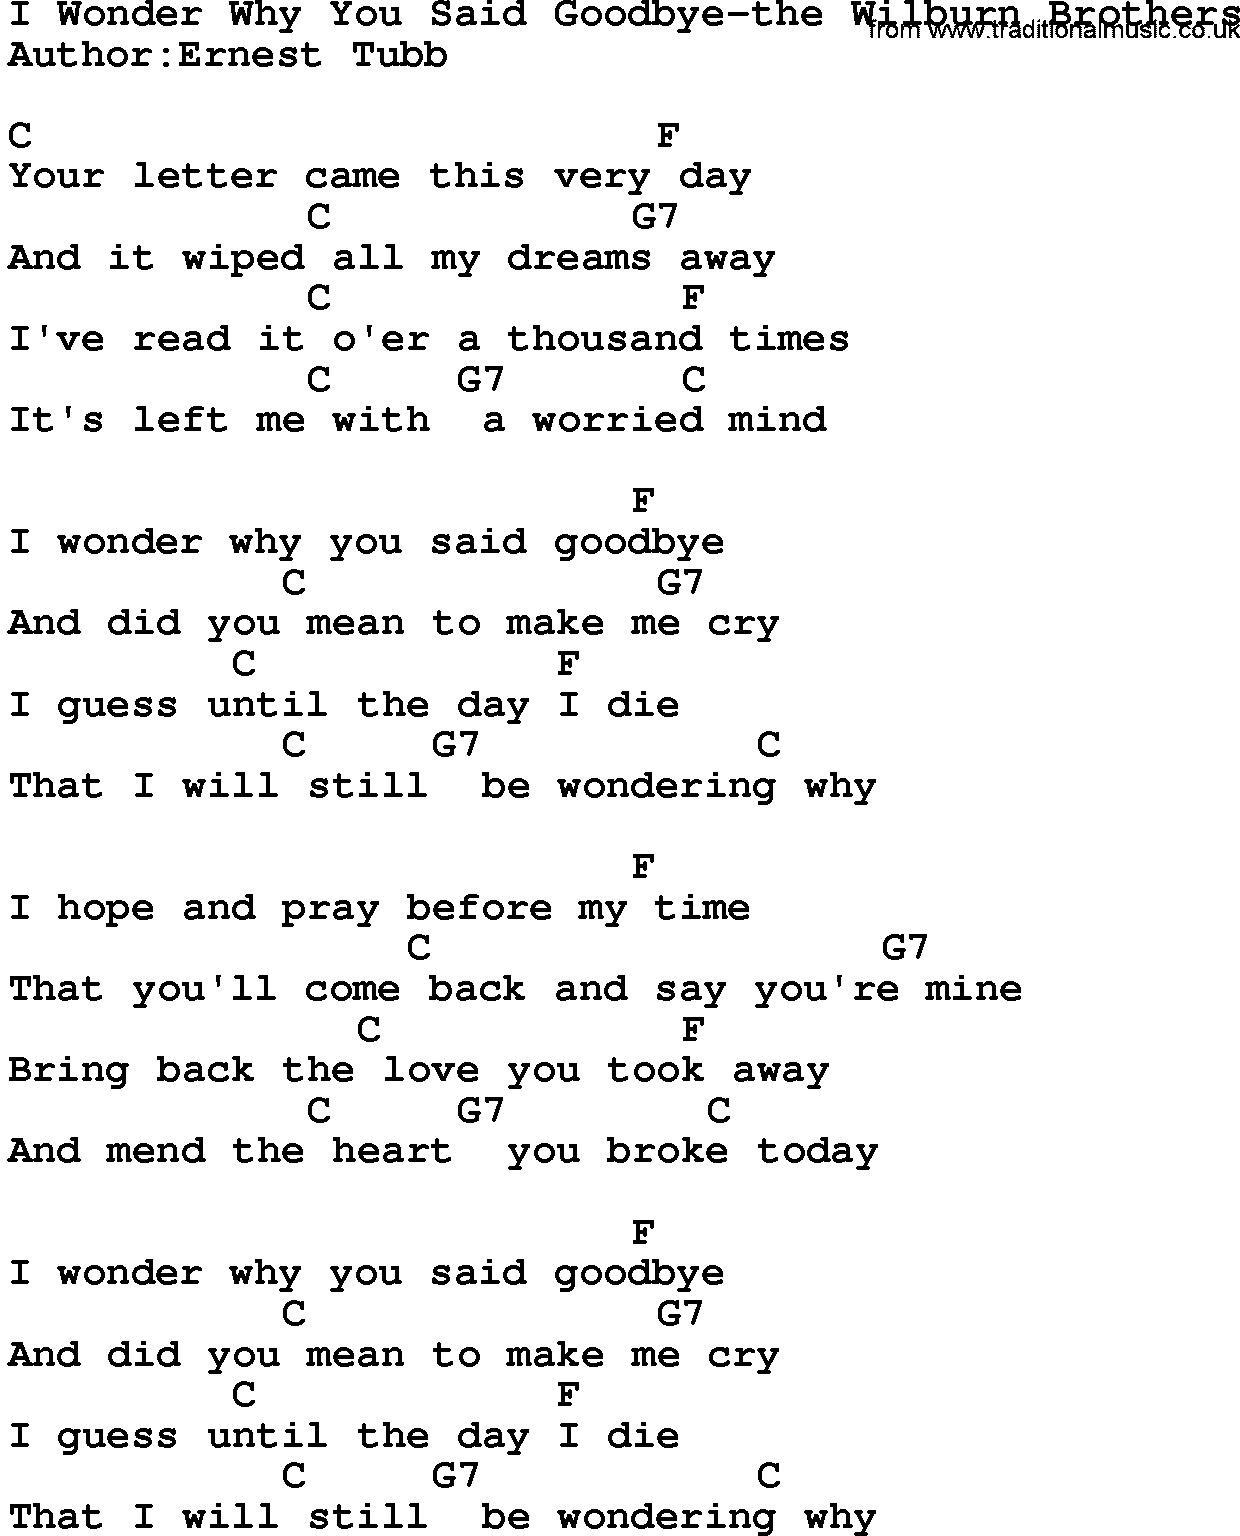 Country music song: I Wonder Why You Said Goodbye-The Wilburn Brothers lyrics and chords